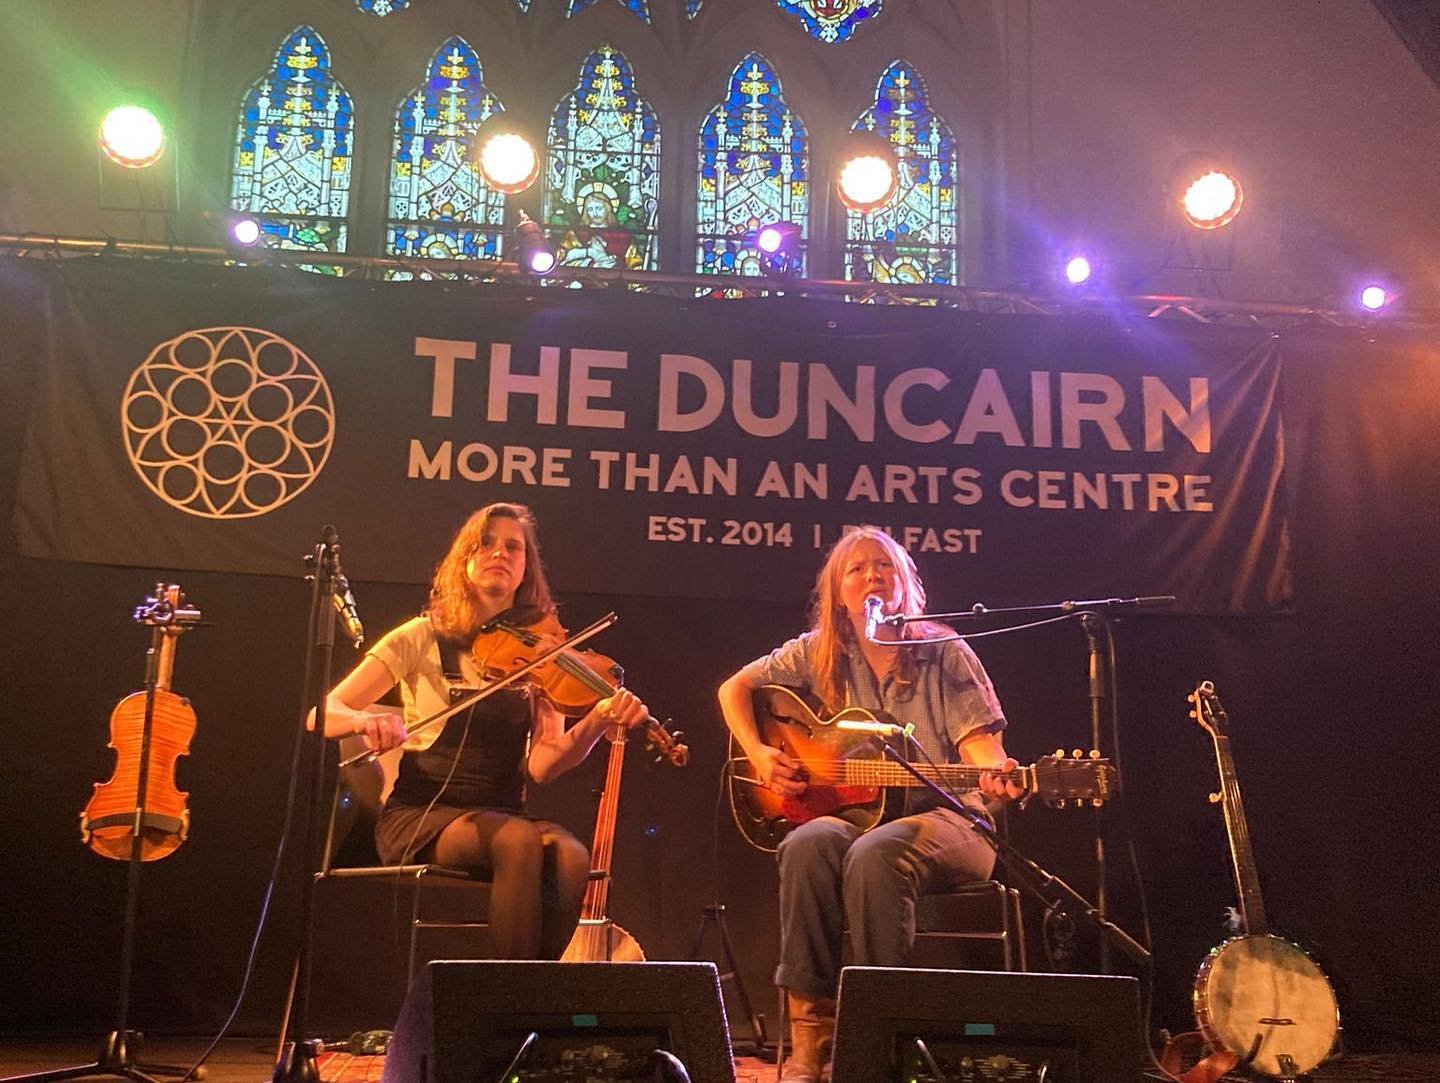 Full house for an outstanding night of music from Ireland and USA. Thanks a million to @little.nb @stephiecoleman @_sineadmckenna @cathleen.music and to all who came along. #oldtimey #folk #music #trad #song #banjo #guitar #harmony #worldfiddleday #f